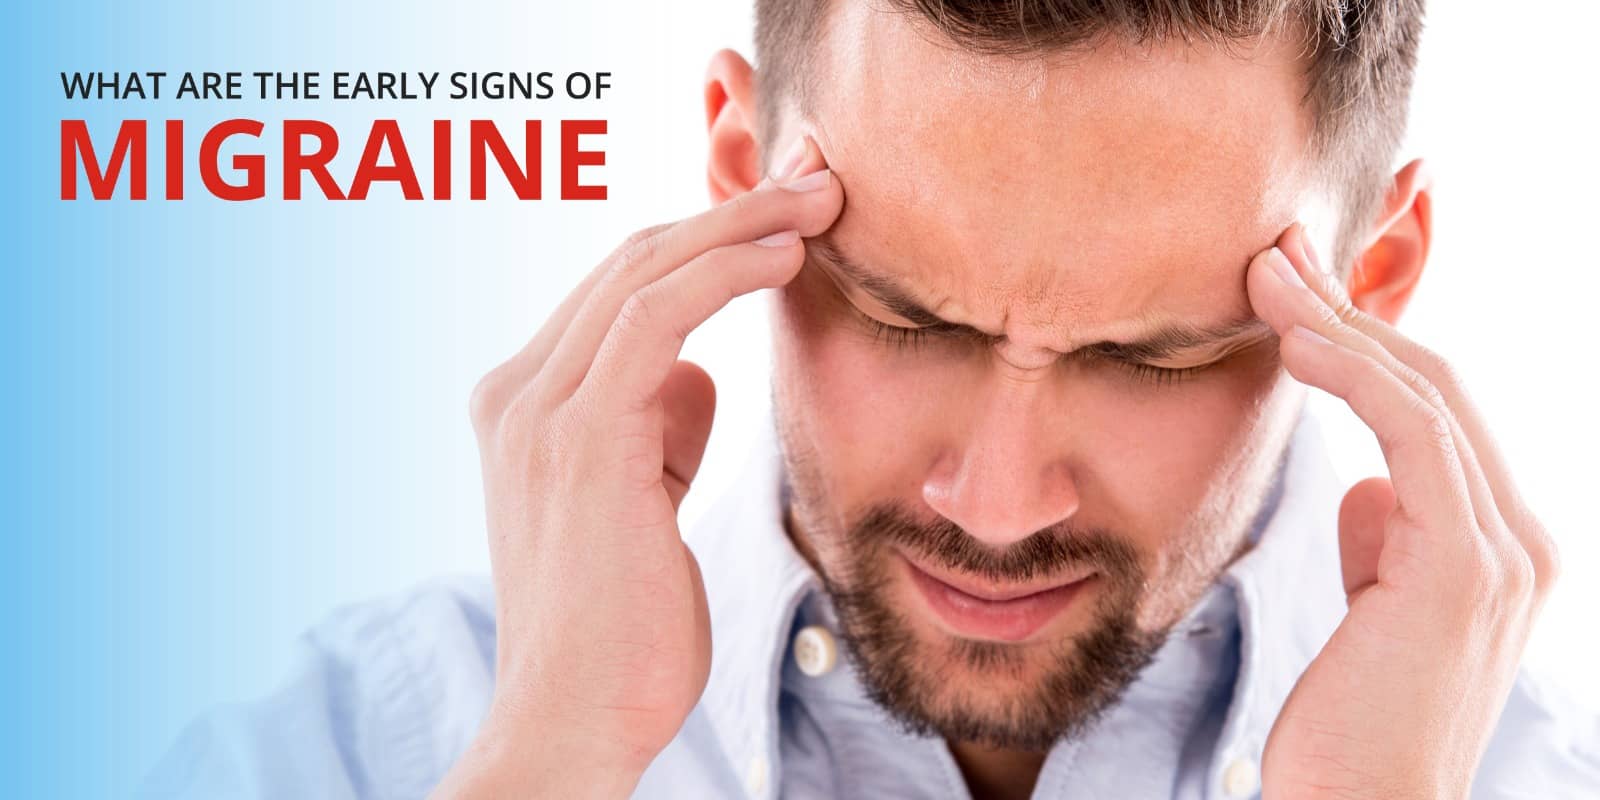 Identifying the initial signs of migraine